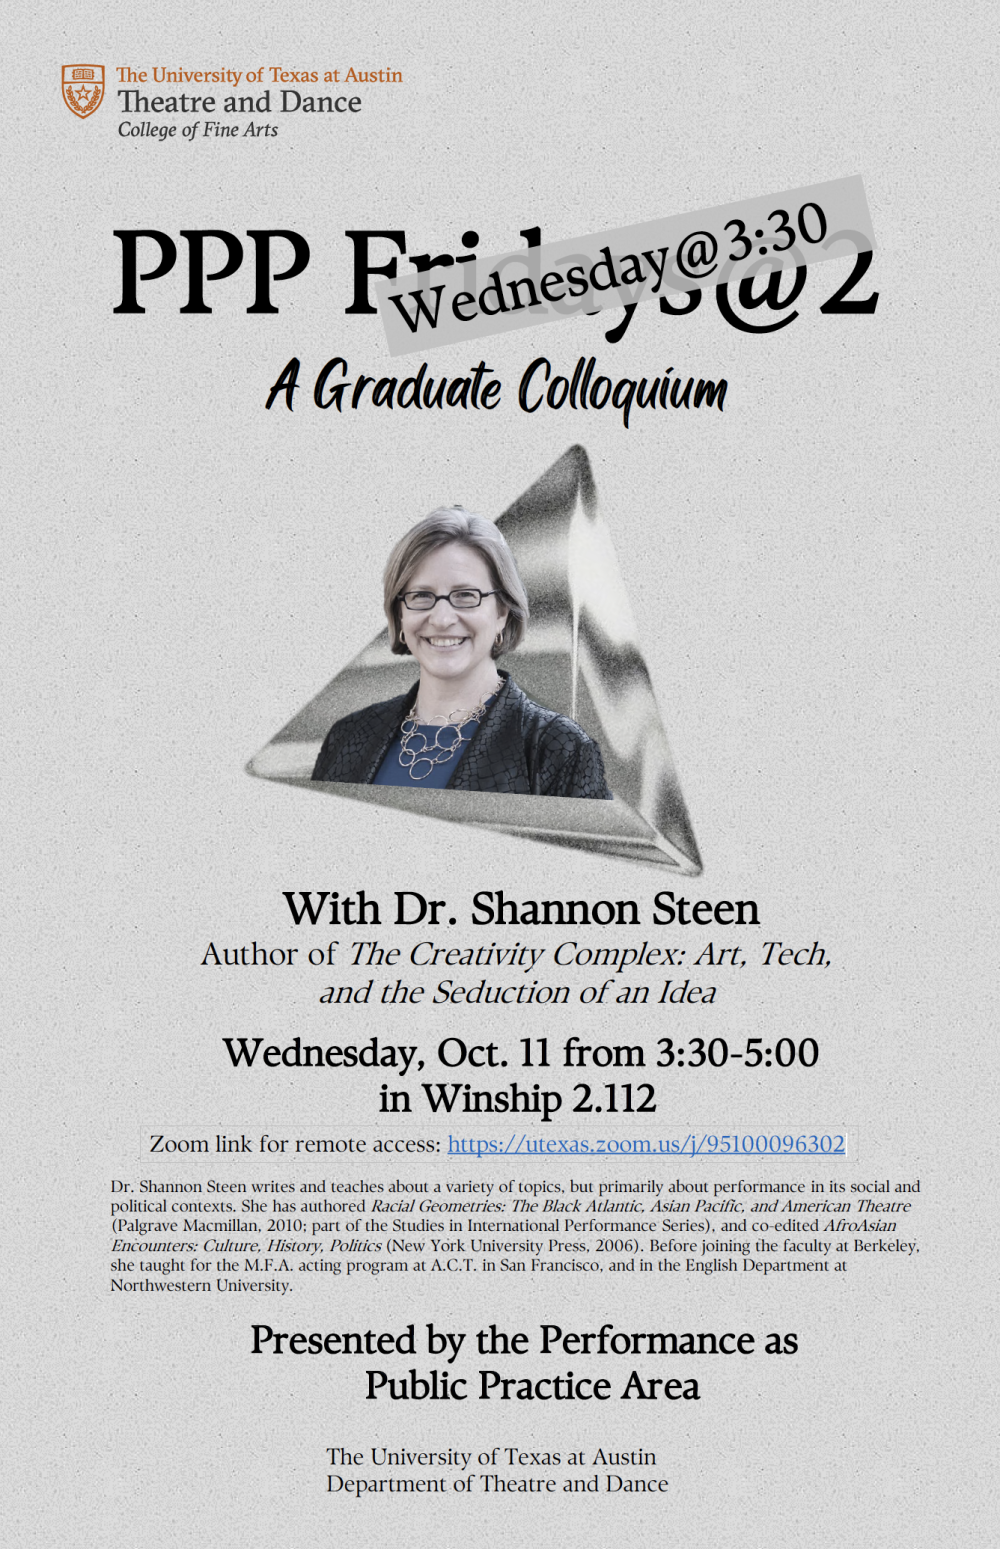 A grey-toned poster for the special Wednesday session of PPP's Fridays@2 speaker series featuring Dr. Shannon Steen